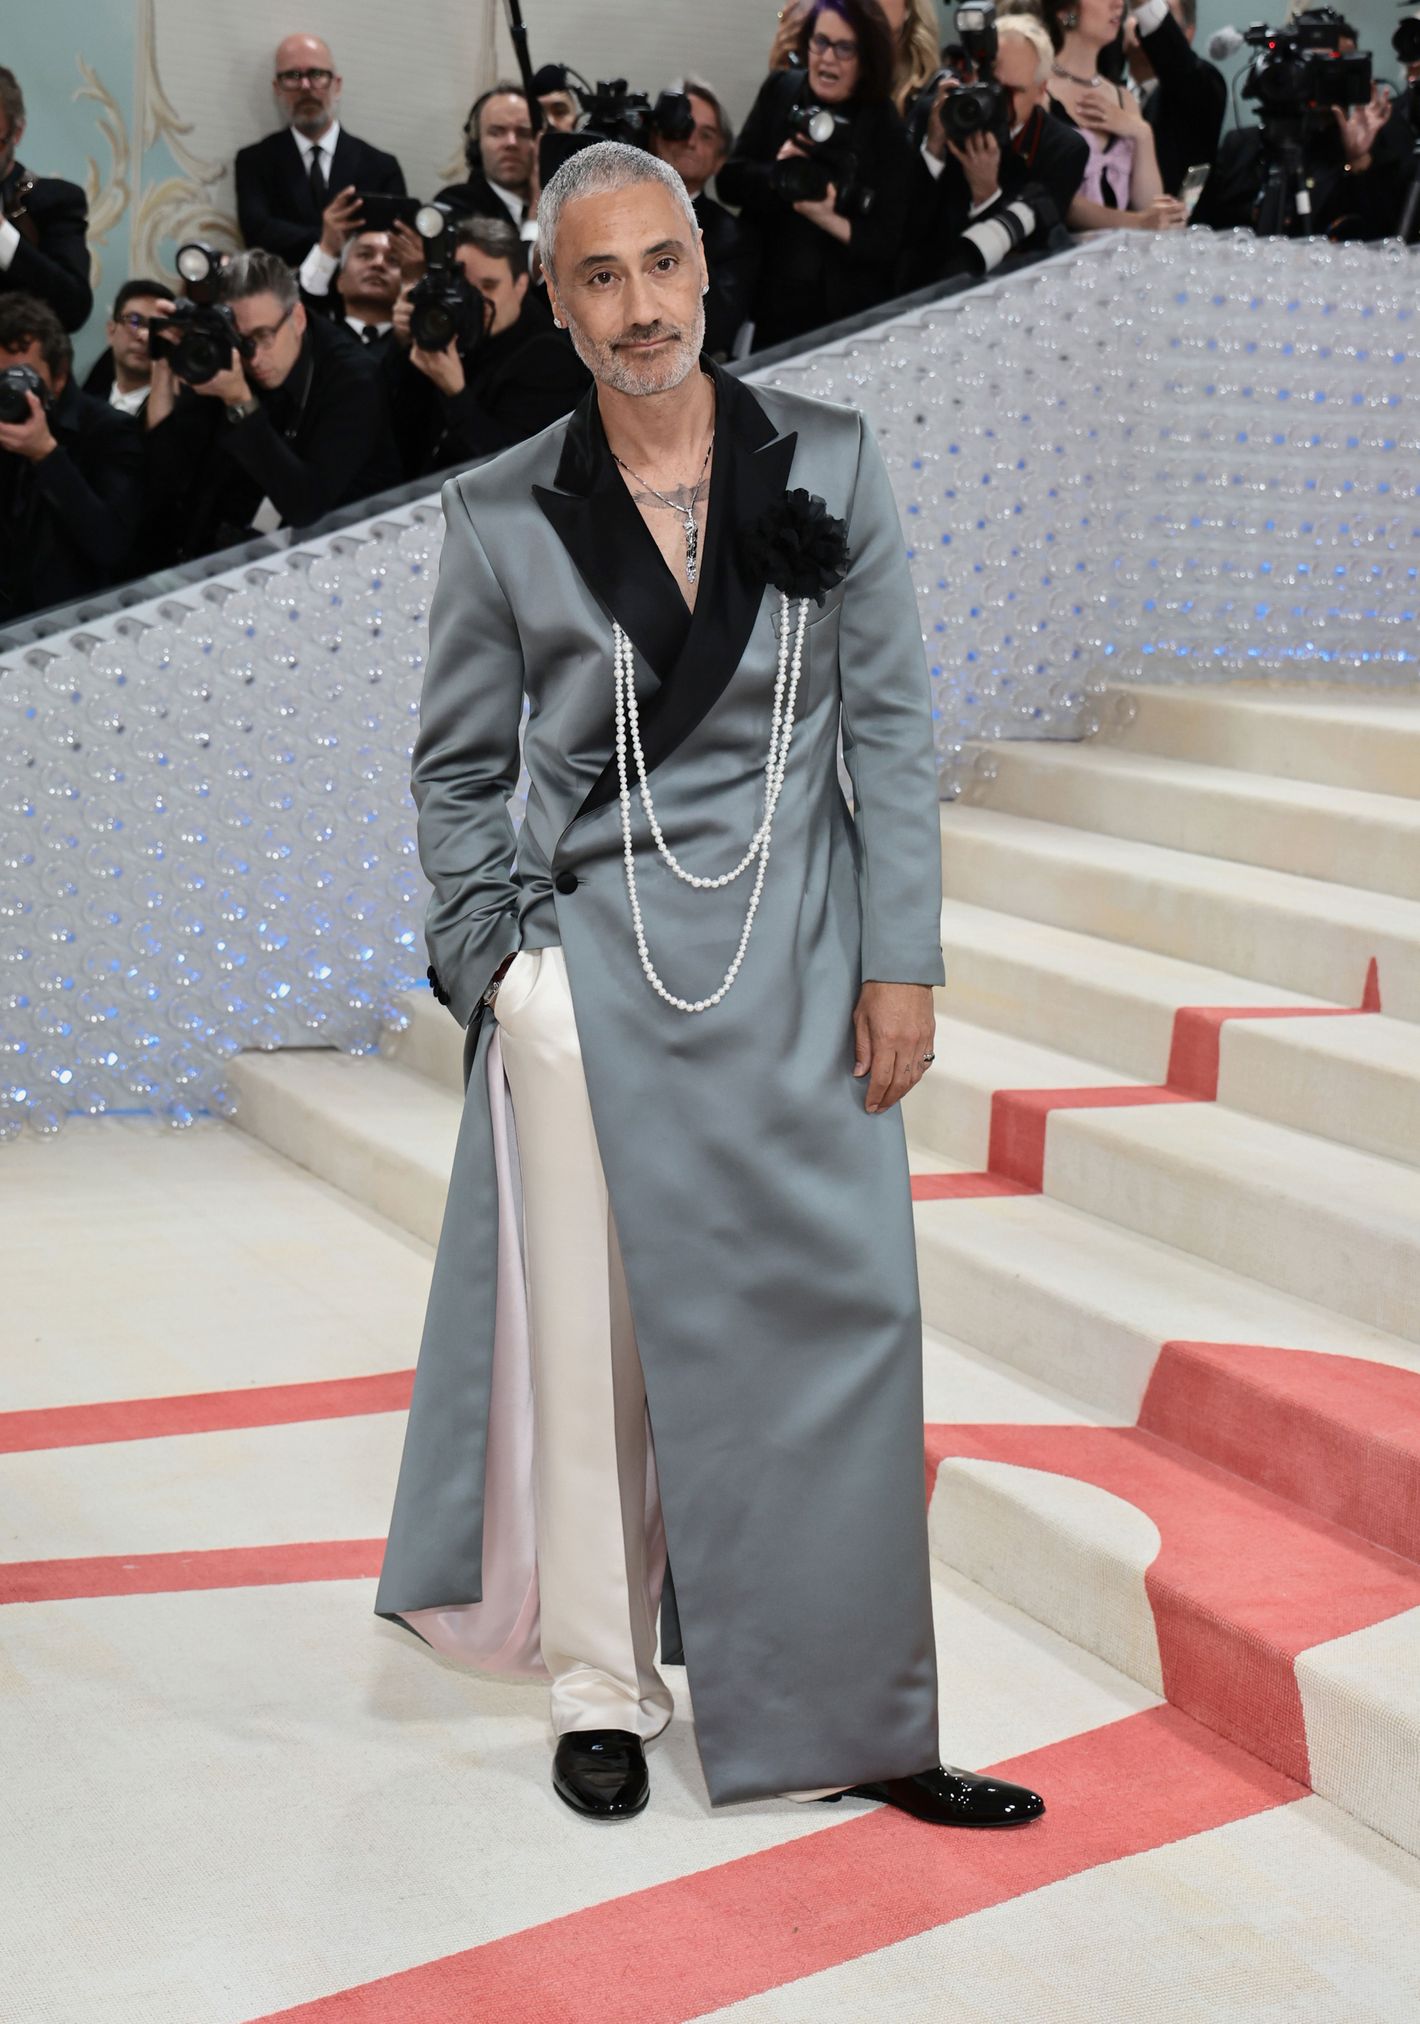 2021 Met Gala: 23 of the wildest outfits